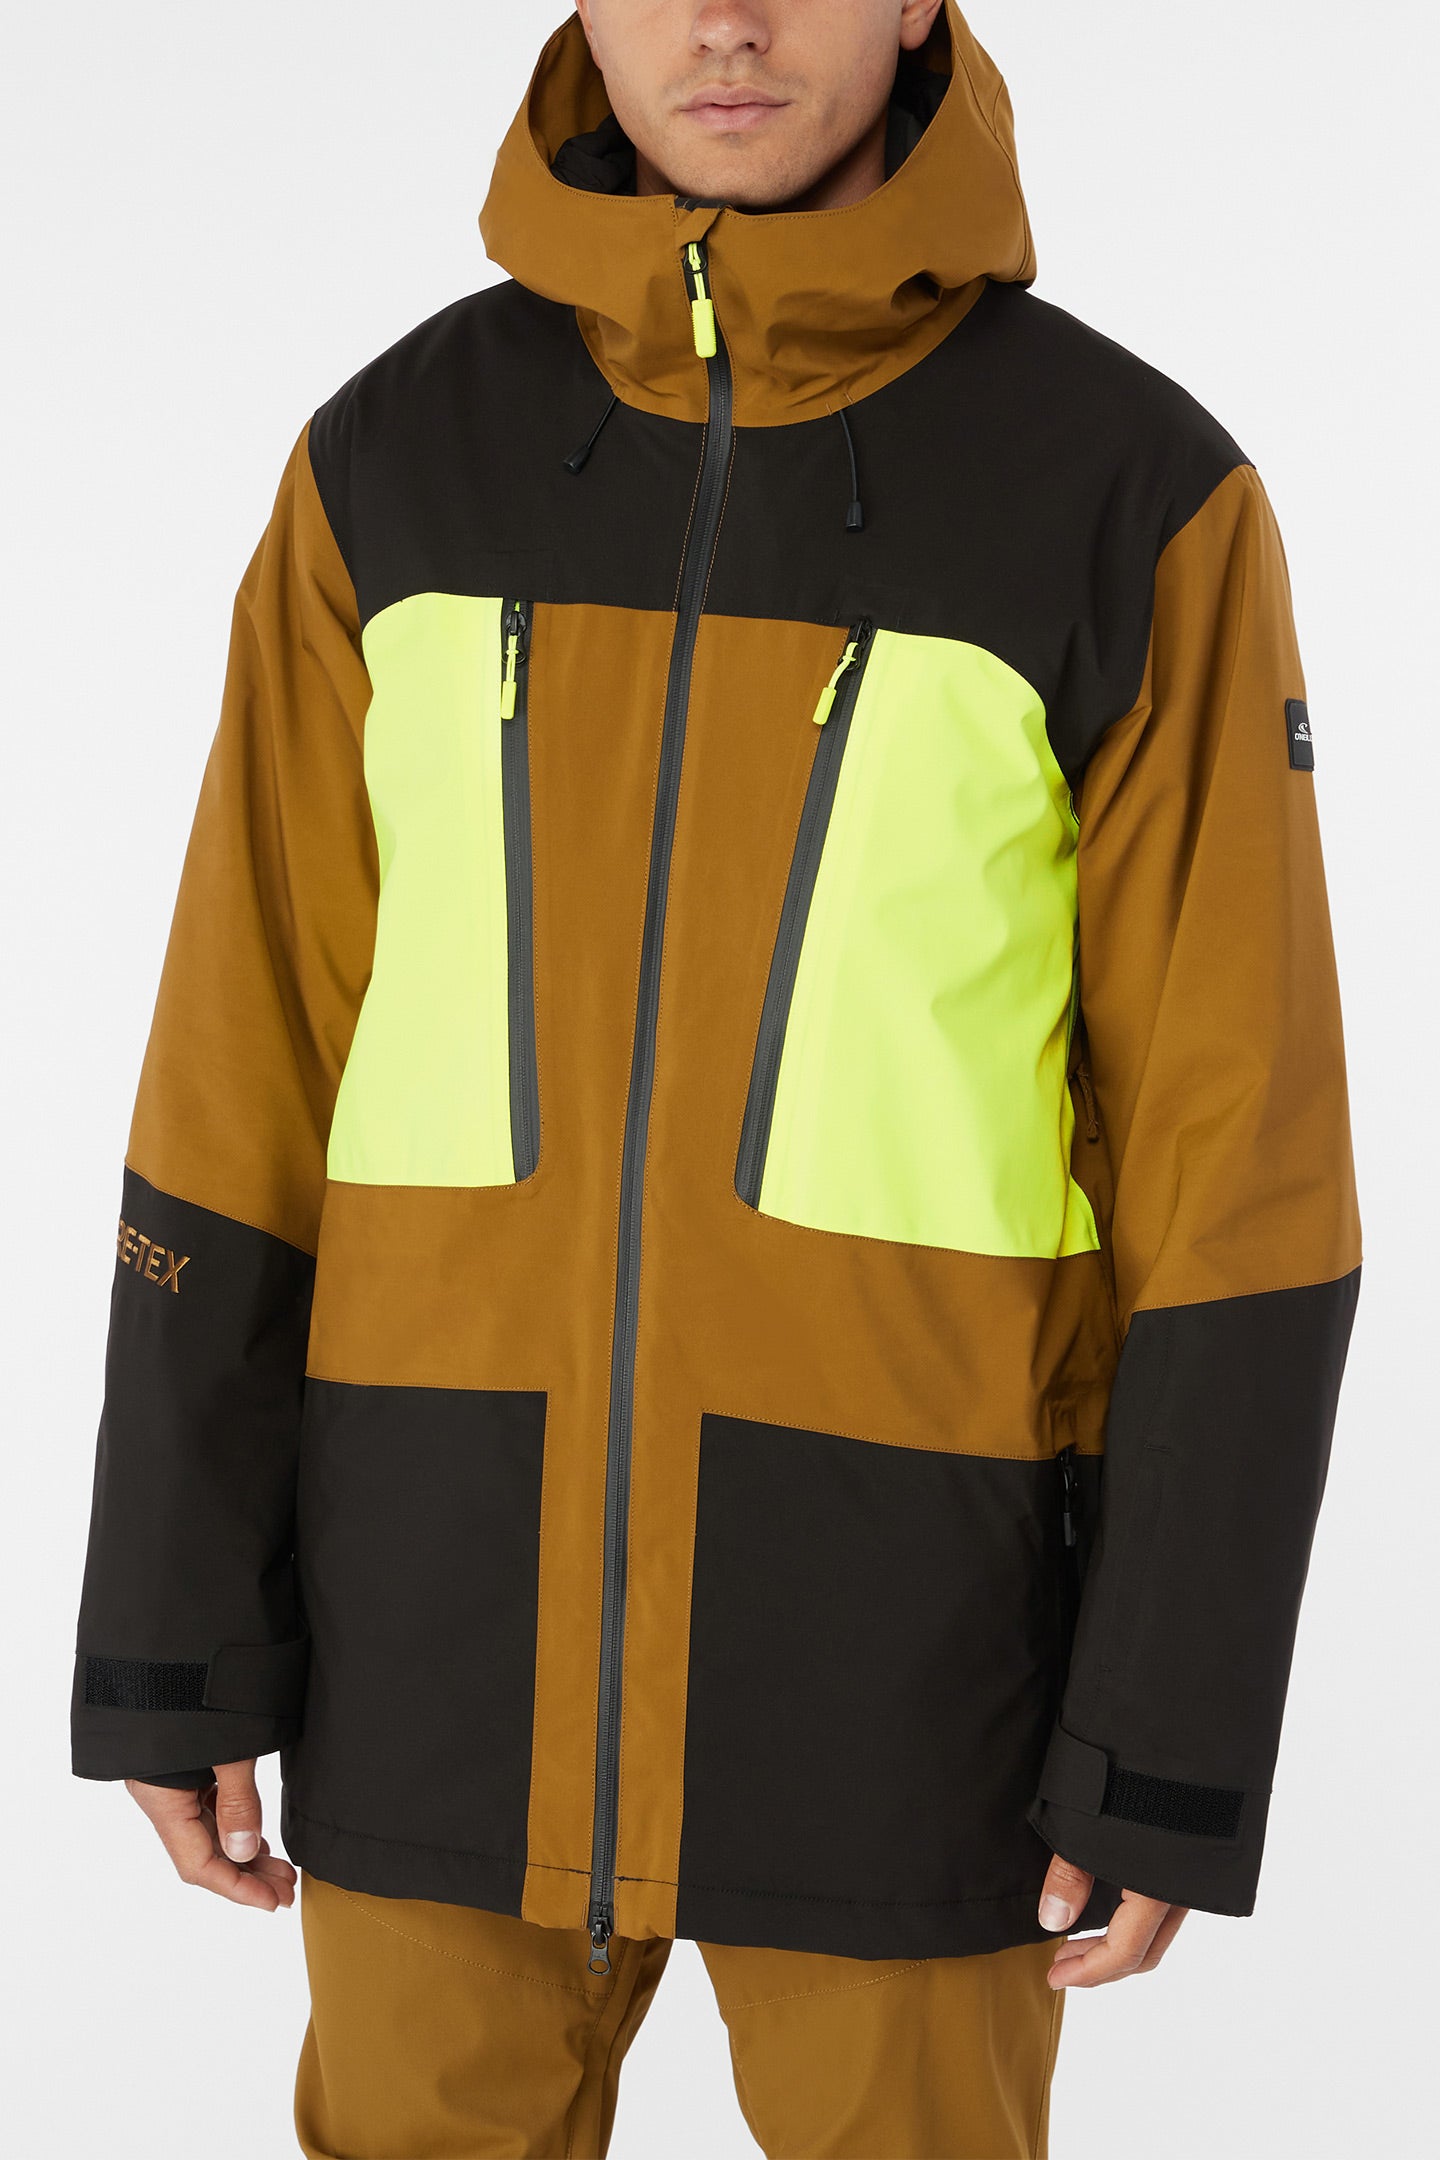 Bluetooth MP3 Snowboarding Jacket from O'Neill